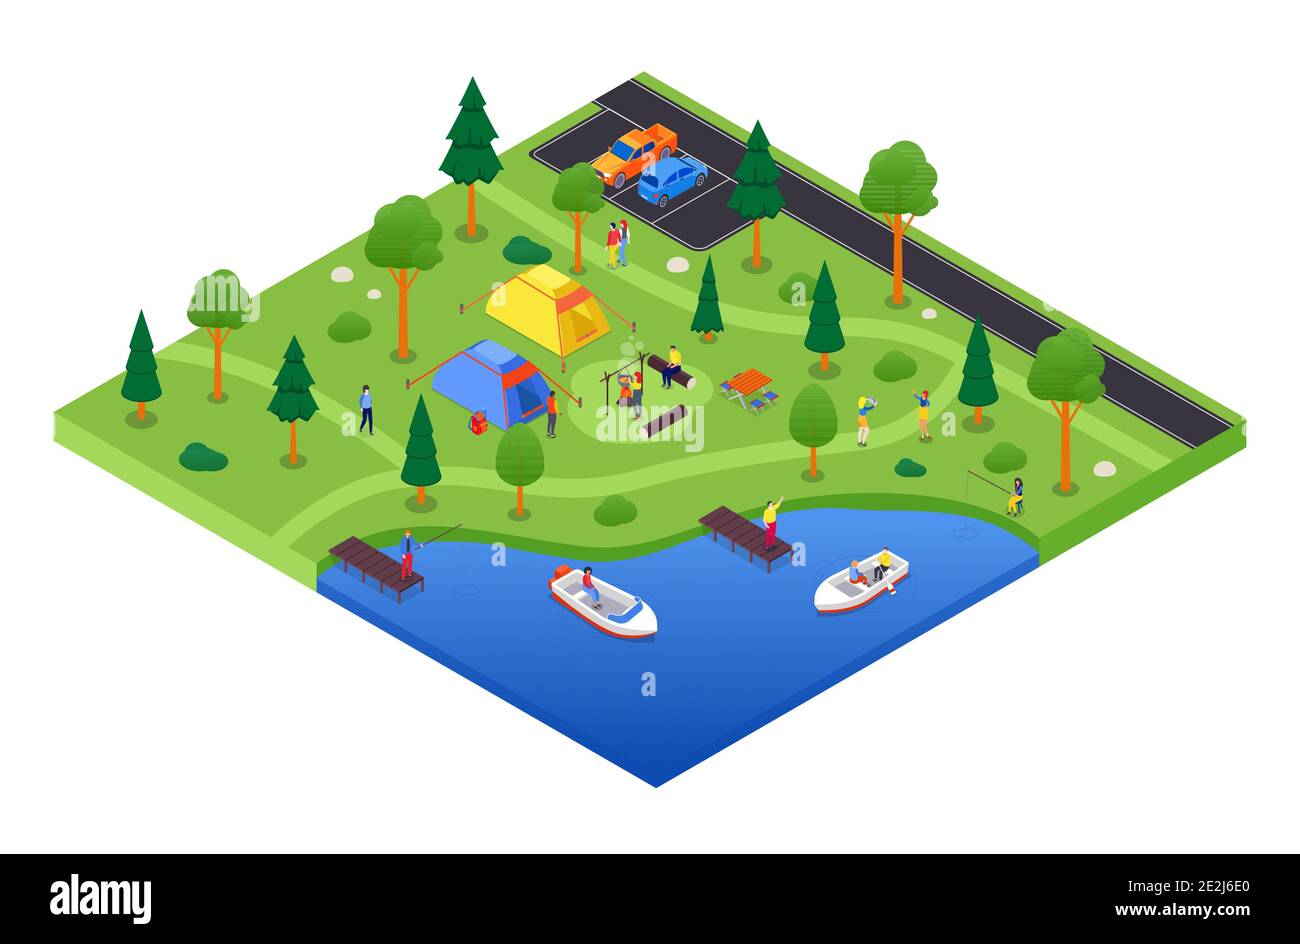 Camping and tourism - vector colorful isometric illustration. Campsite with tents in the forest, trees, parking lot. Tourists sitting at the bonfire, Stock Vector